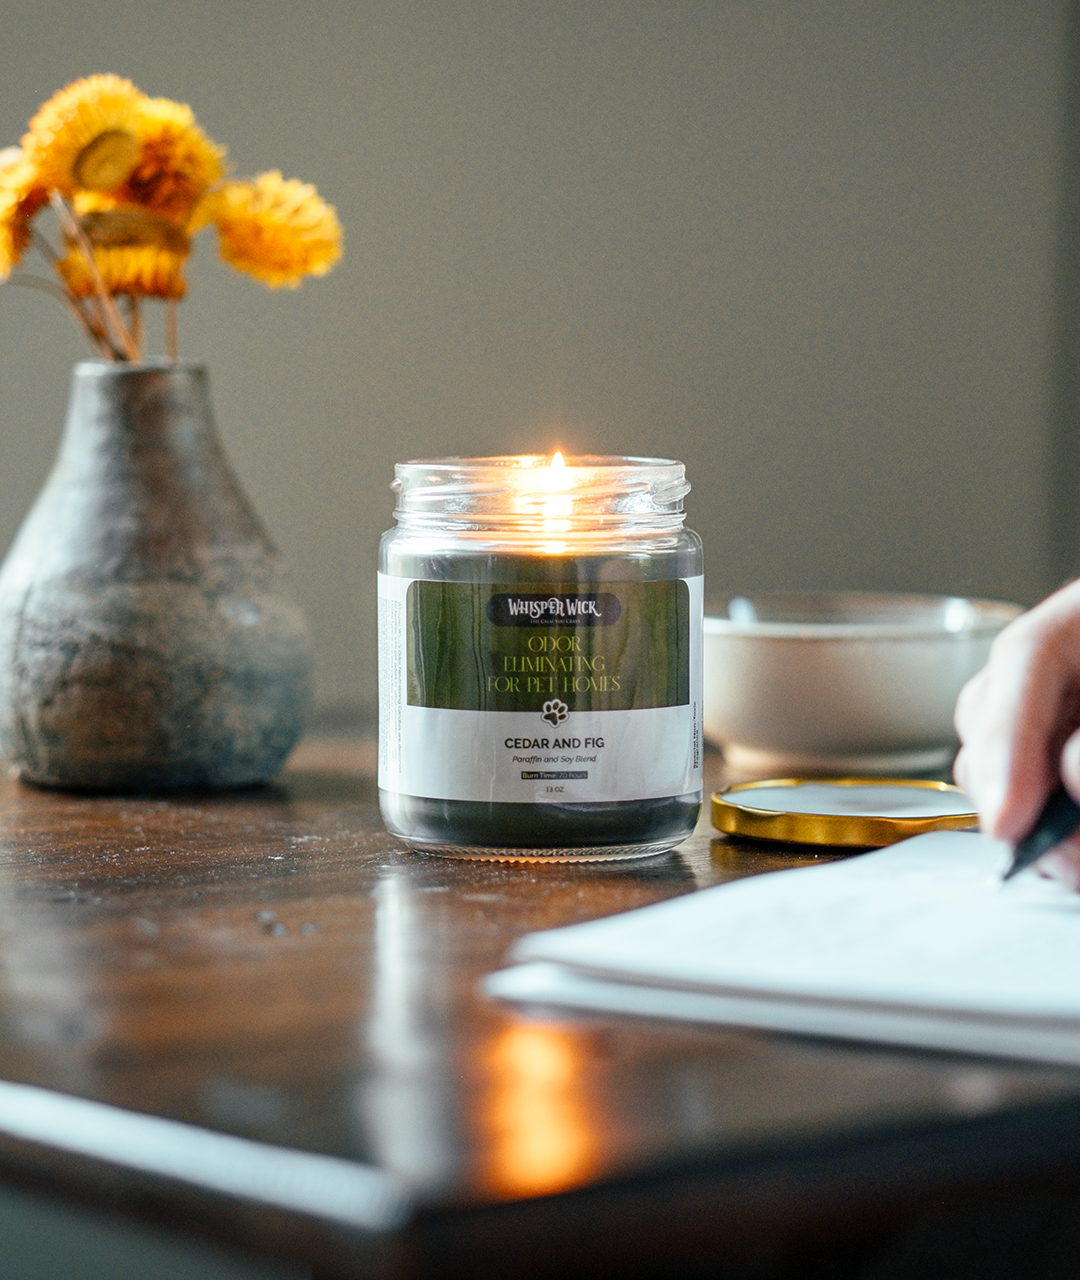 Odor Eliminating Candles from Whisper Wick